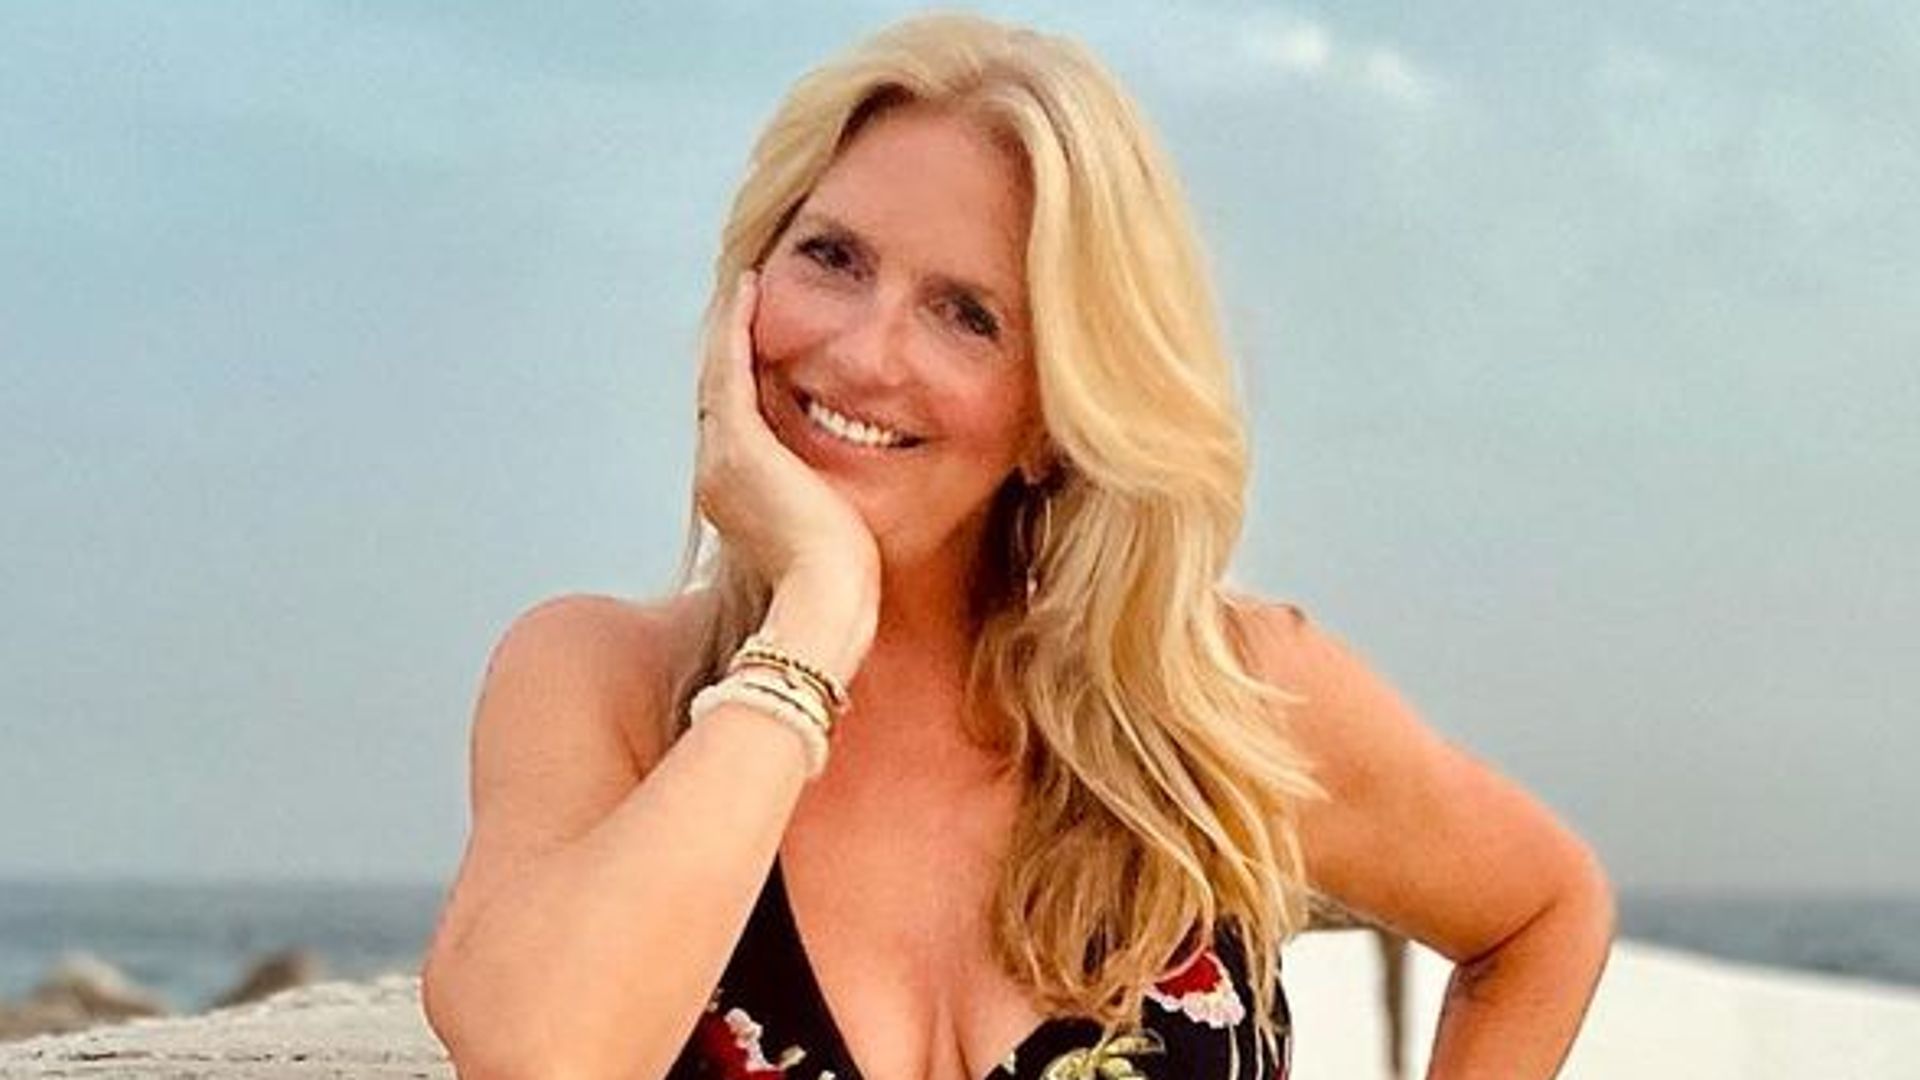 Rod Stewart wife Penny Lancaster wearing black and red floral dress with plunging neckline at seaside